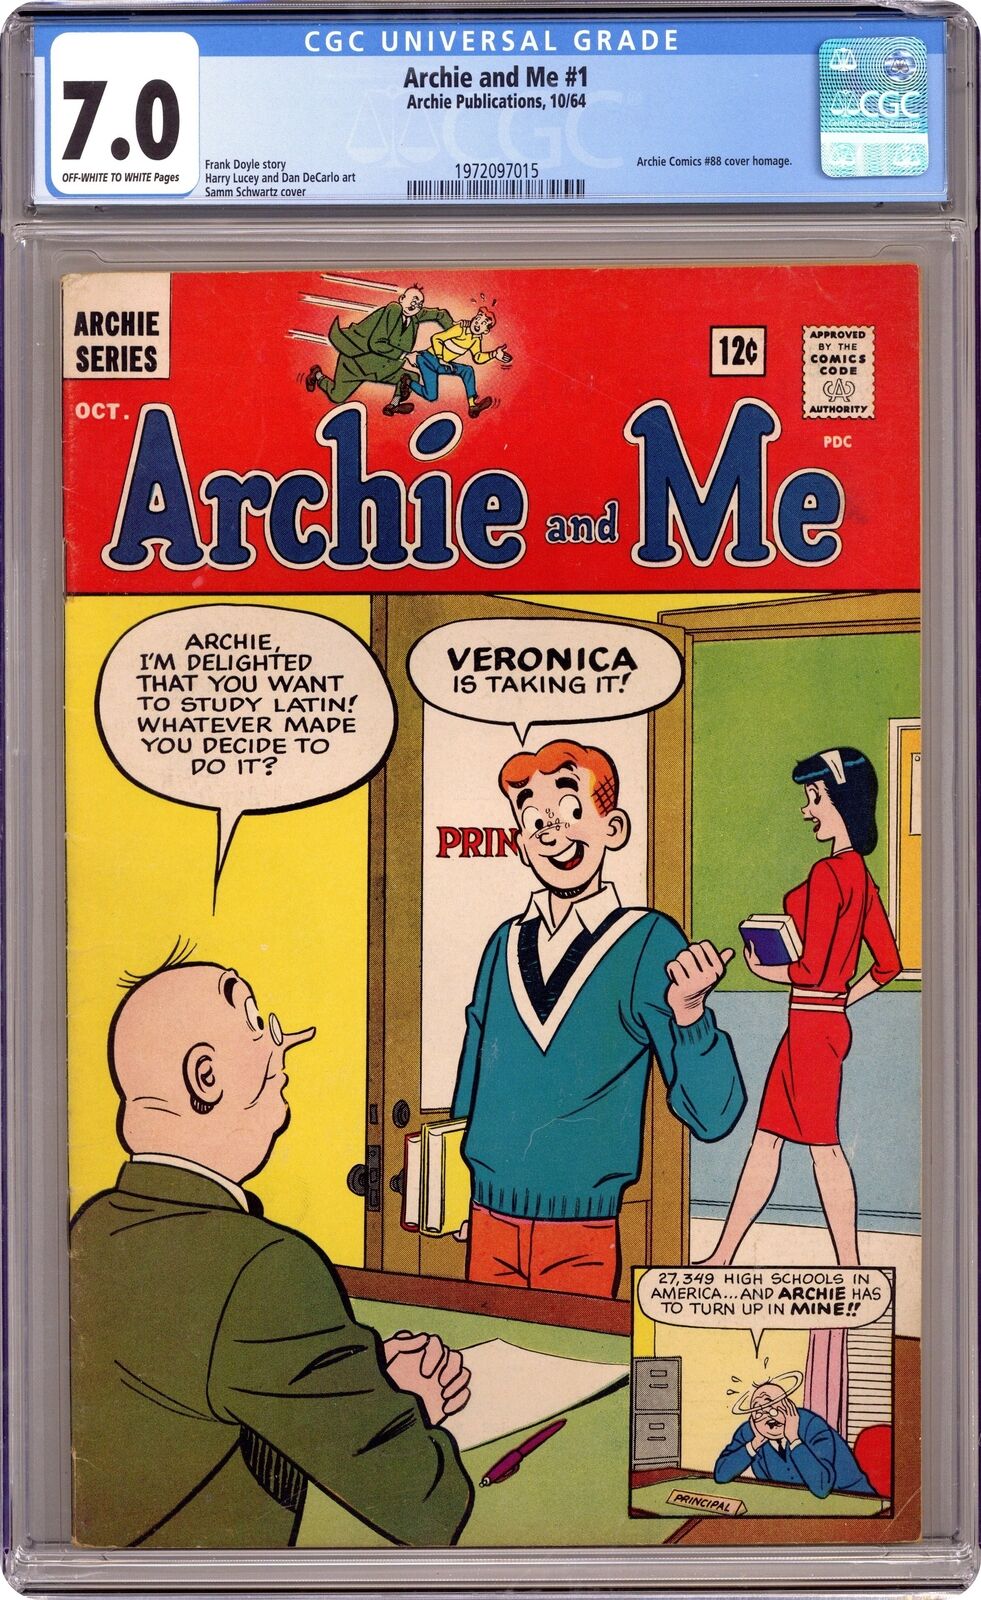 Archie and Me #1 CGC 7.0 1964 1972097015